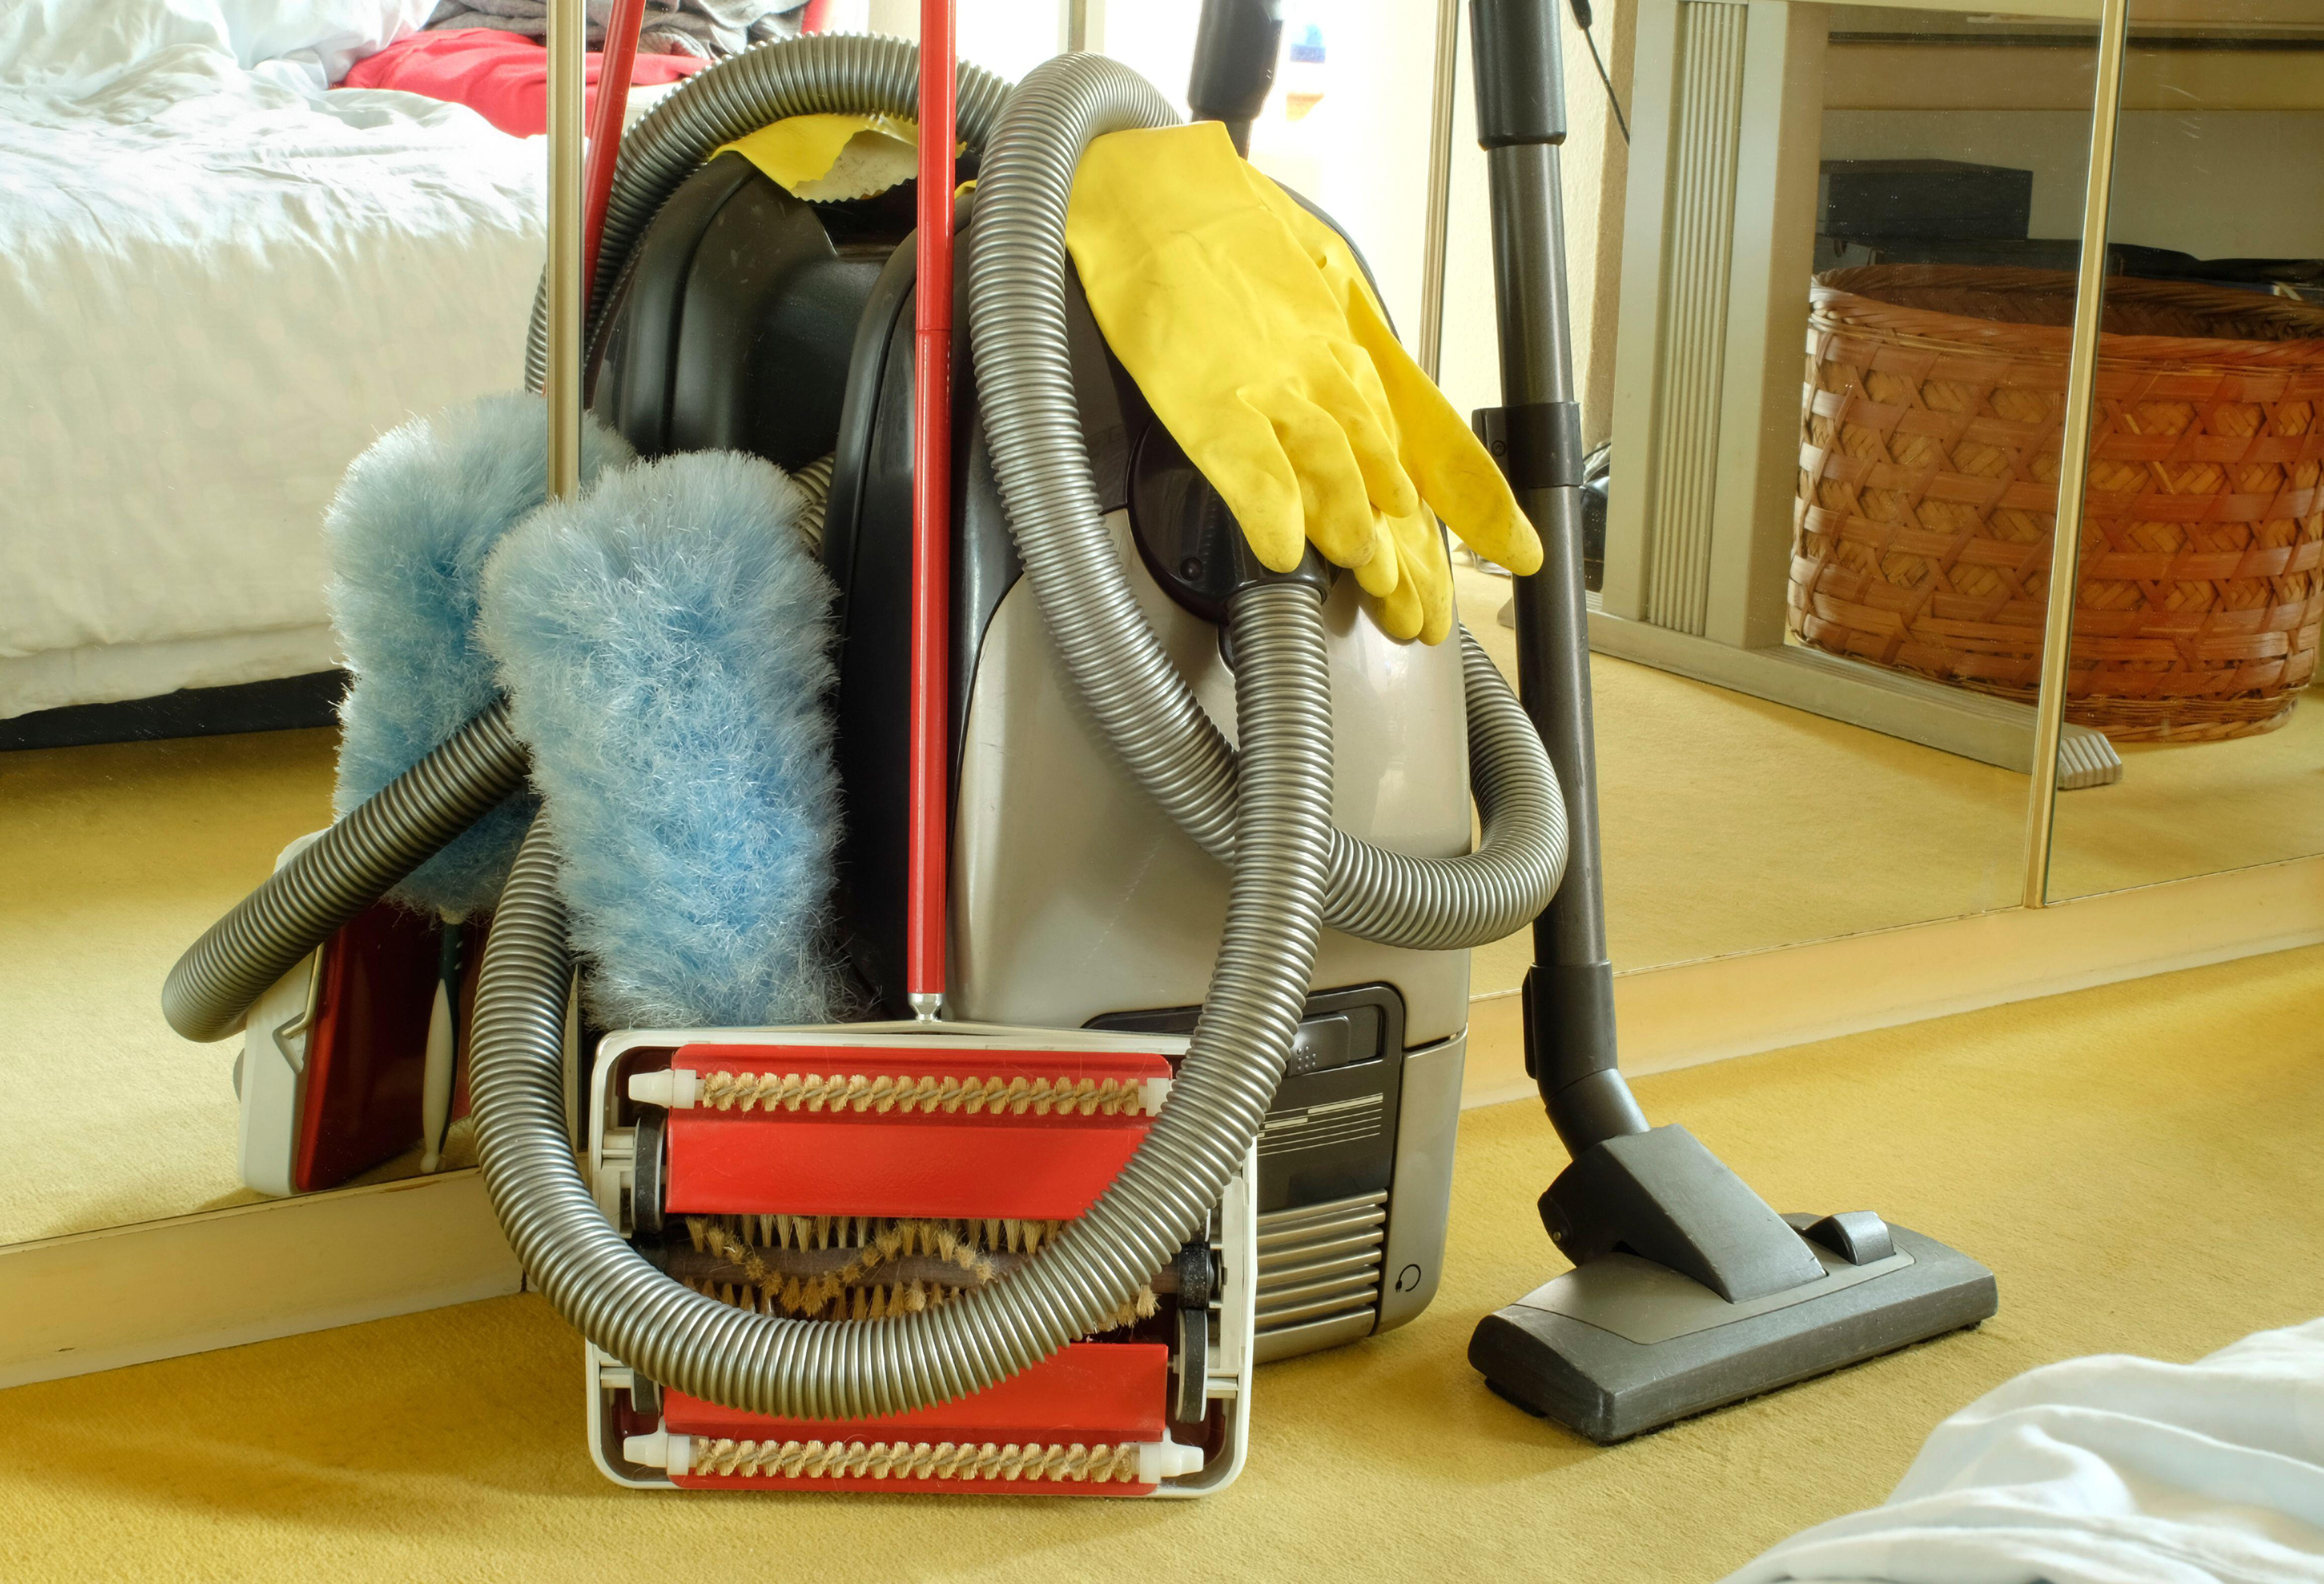 Vacuum cleaner with carpet sweeper and feather duster